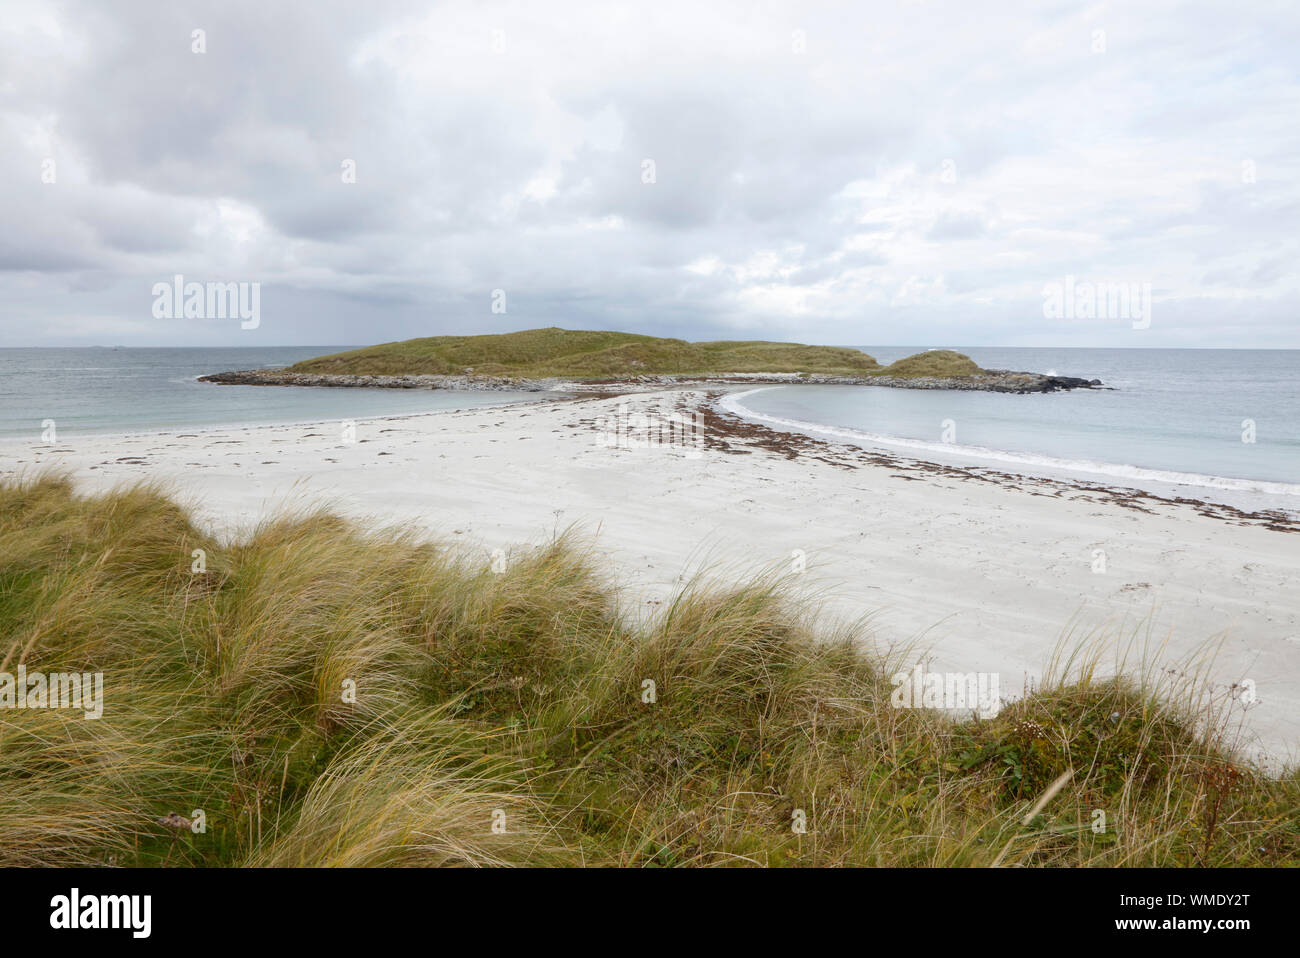 View across to Rubha Huilis from Traigh Udal beach, North Uist, Outer Hebrides, Scotland. Stock Photo